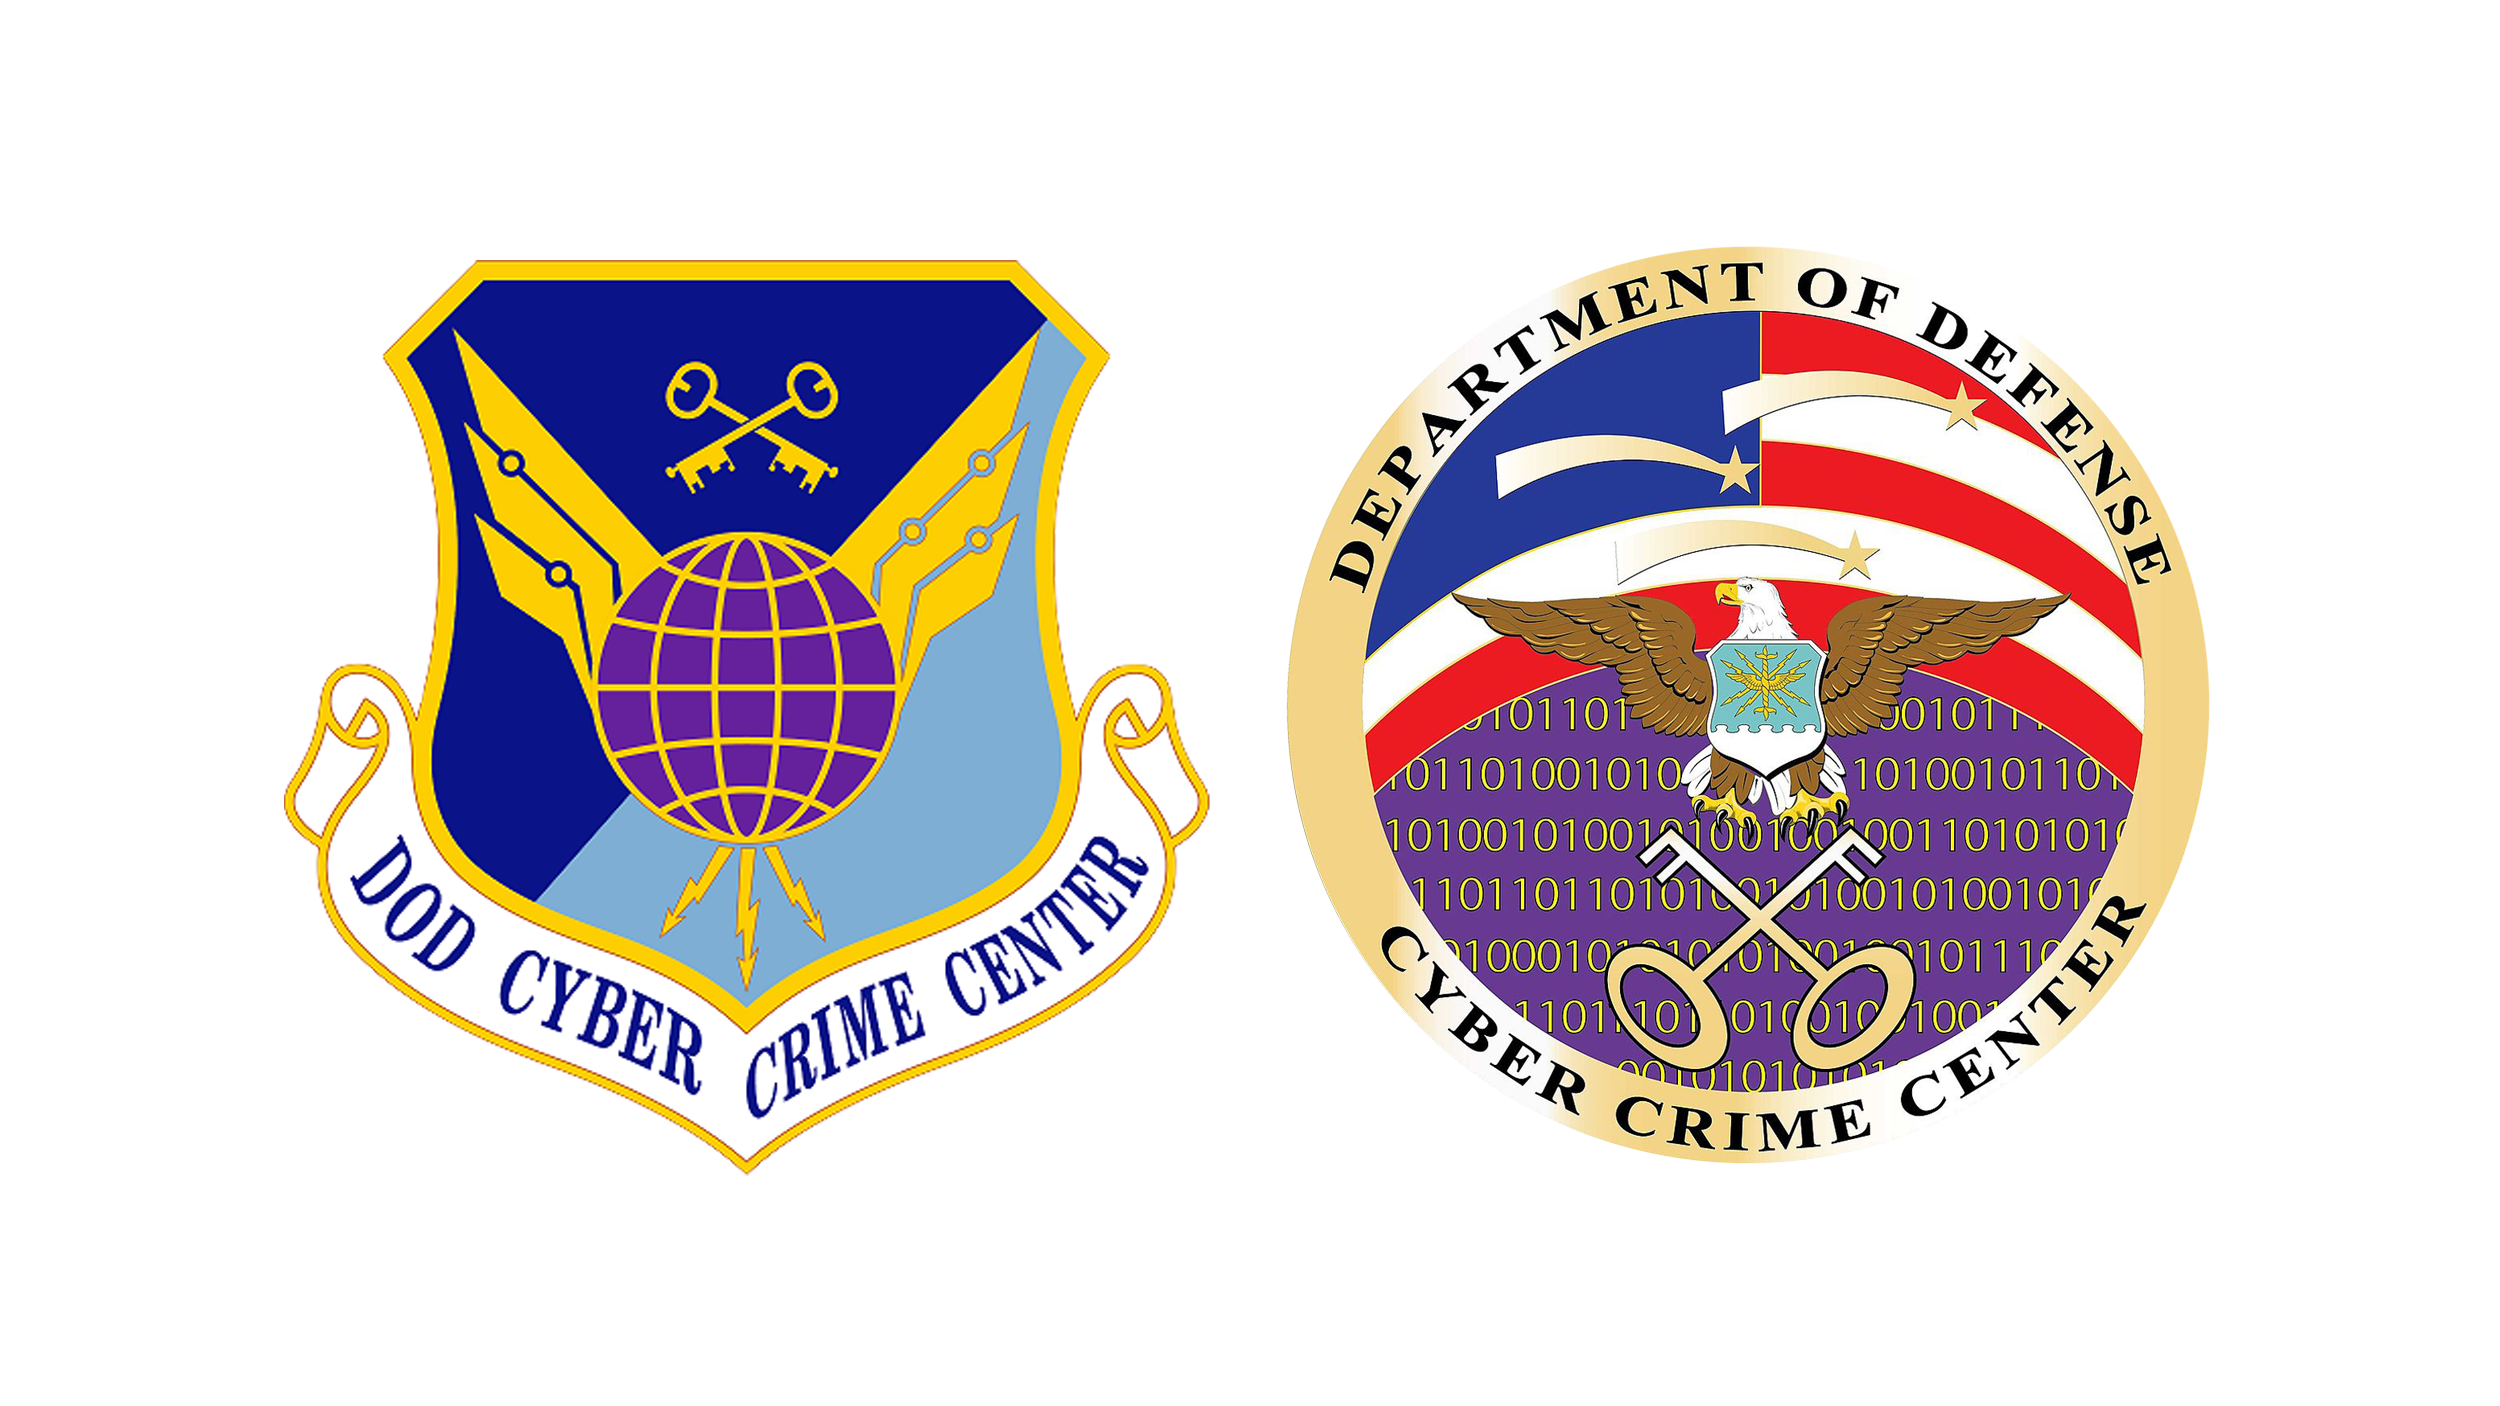 National Center of Digital Forensics Academic Excellence logo and U.S. Department of Defense Cyber Crime Center logo